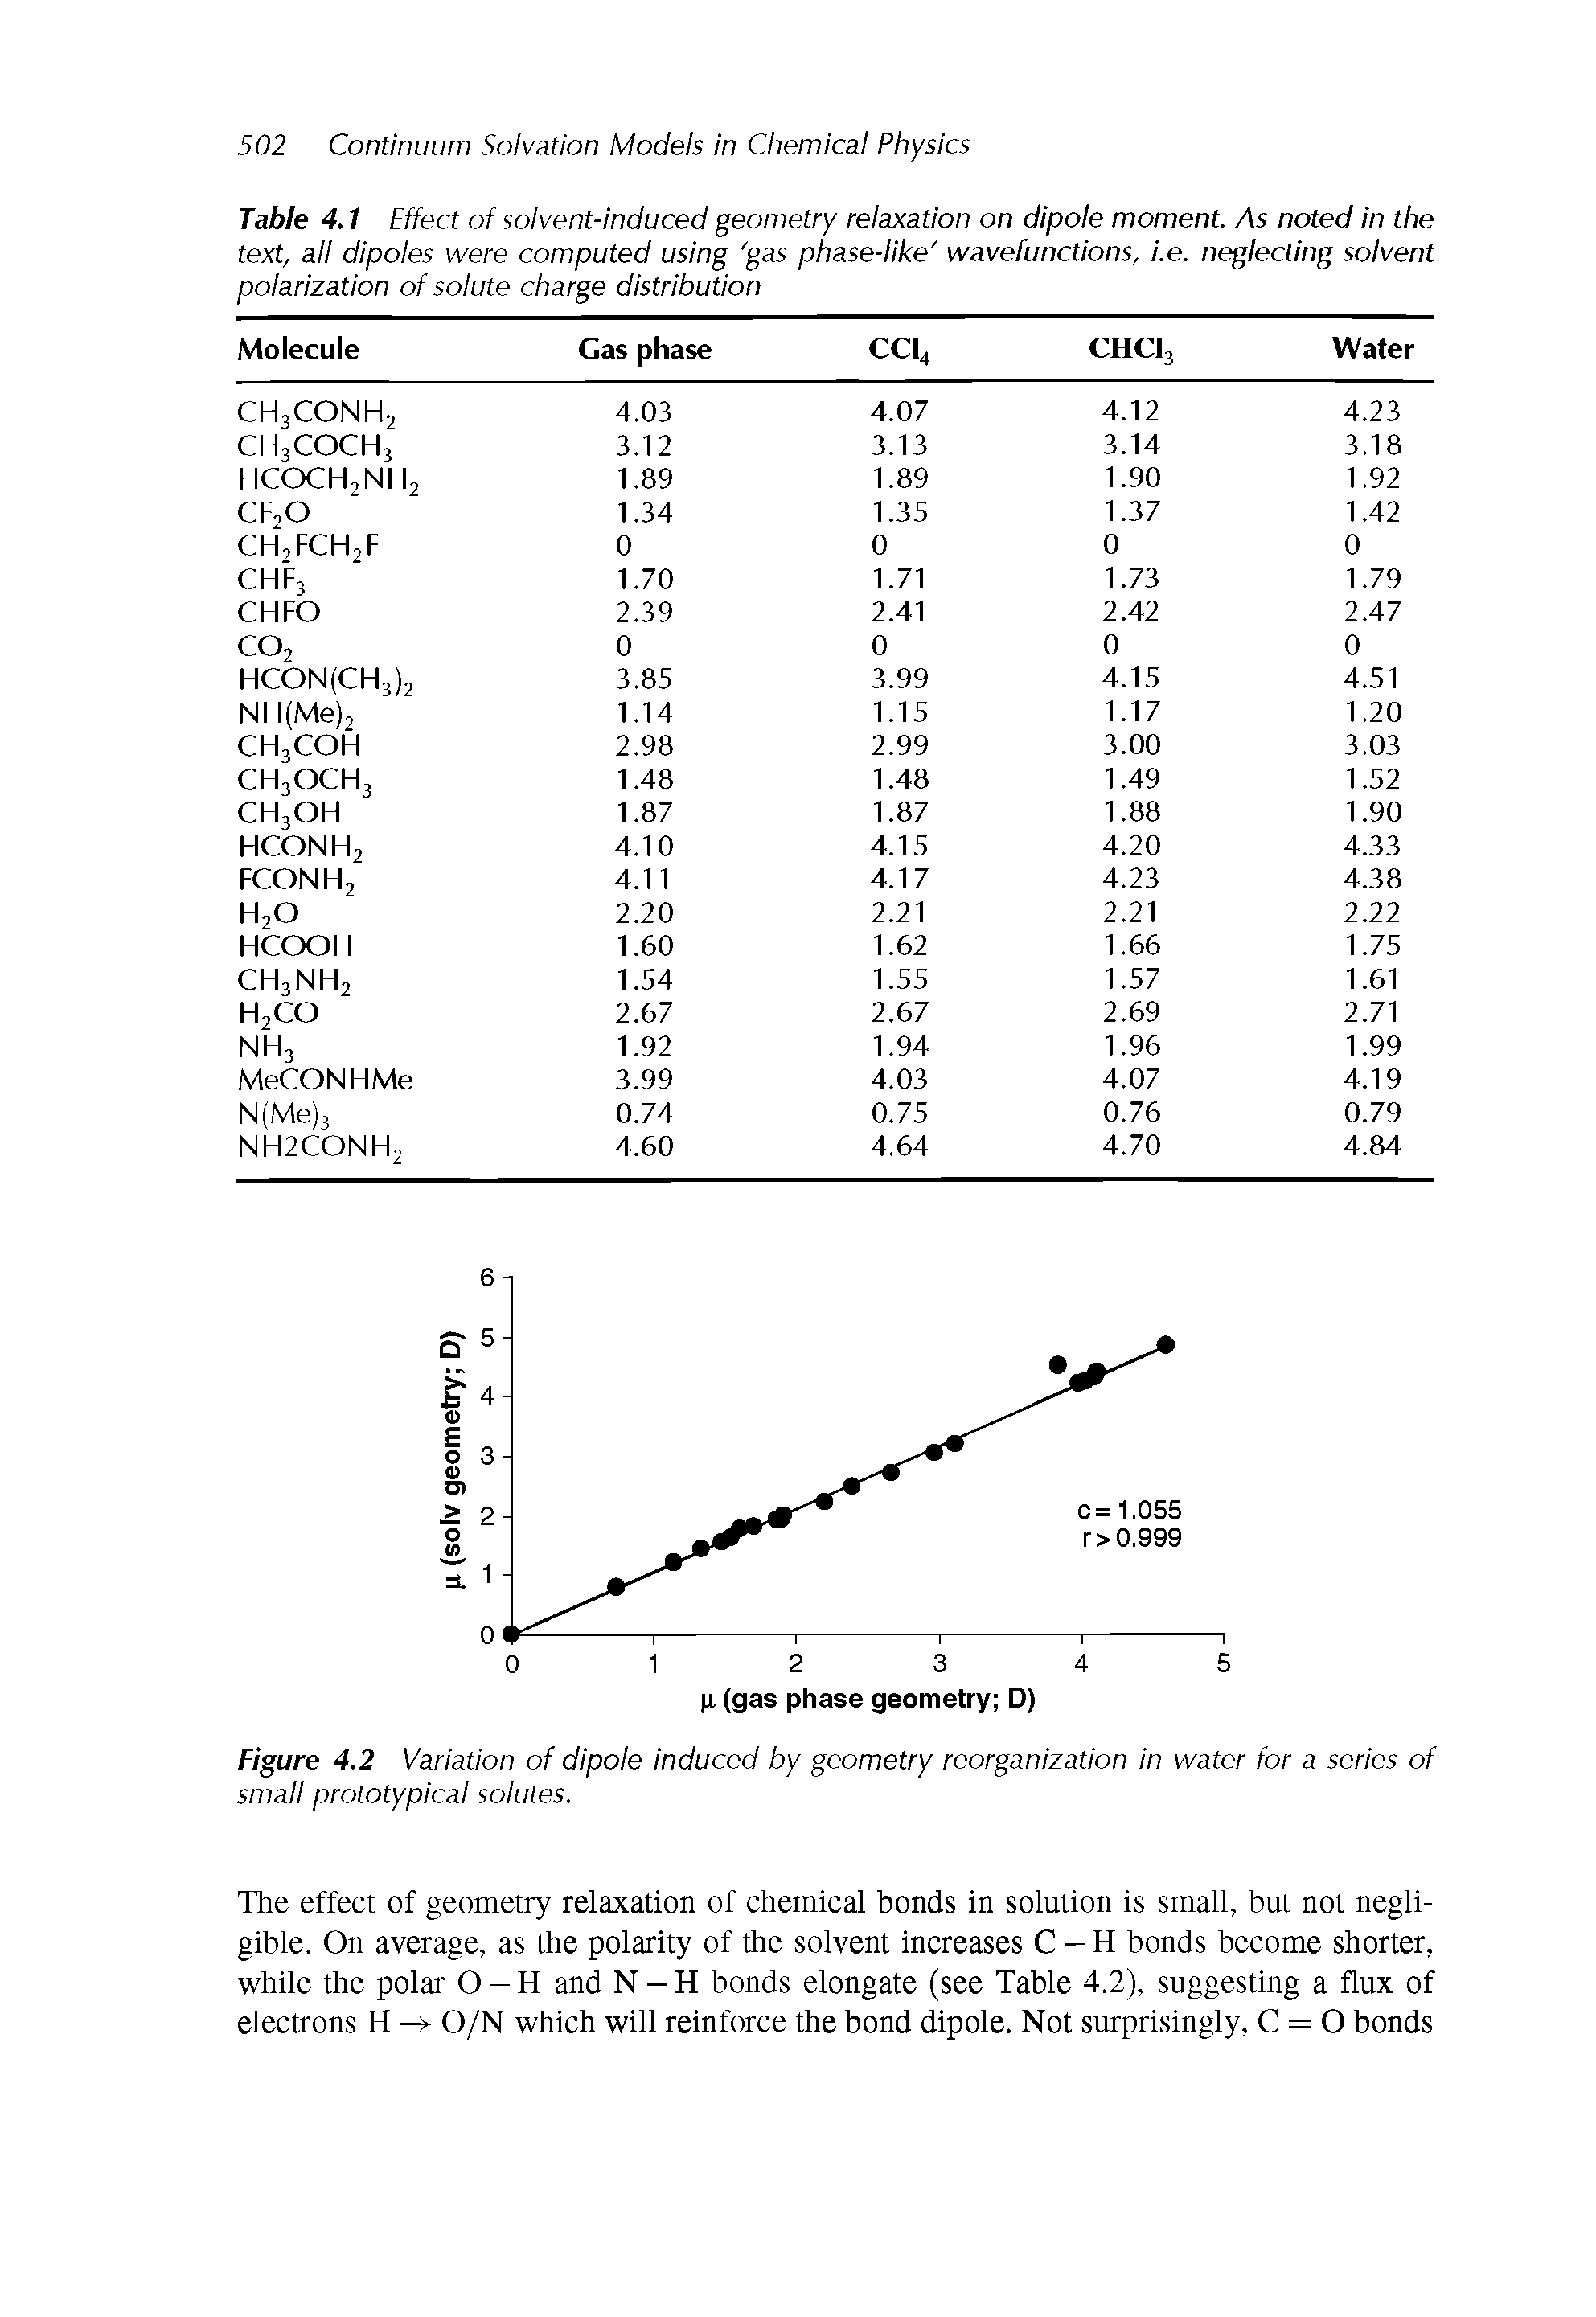 Table 4.1 Effect of solvent-induced geometry relaxation on dipole moment. As noted in the text, all dipoles were computed using gas phase-like wavefunctions, i.e. neglecting solvent polarization of solute charge distribution...